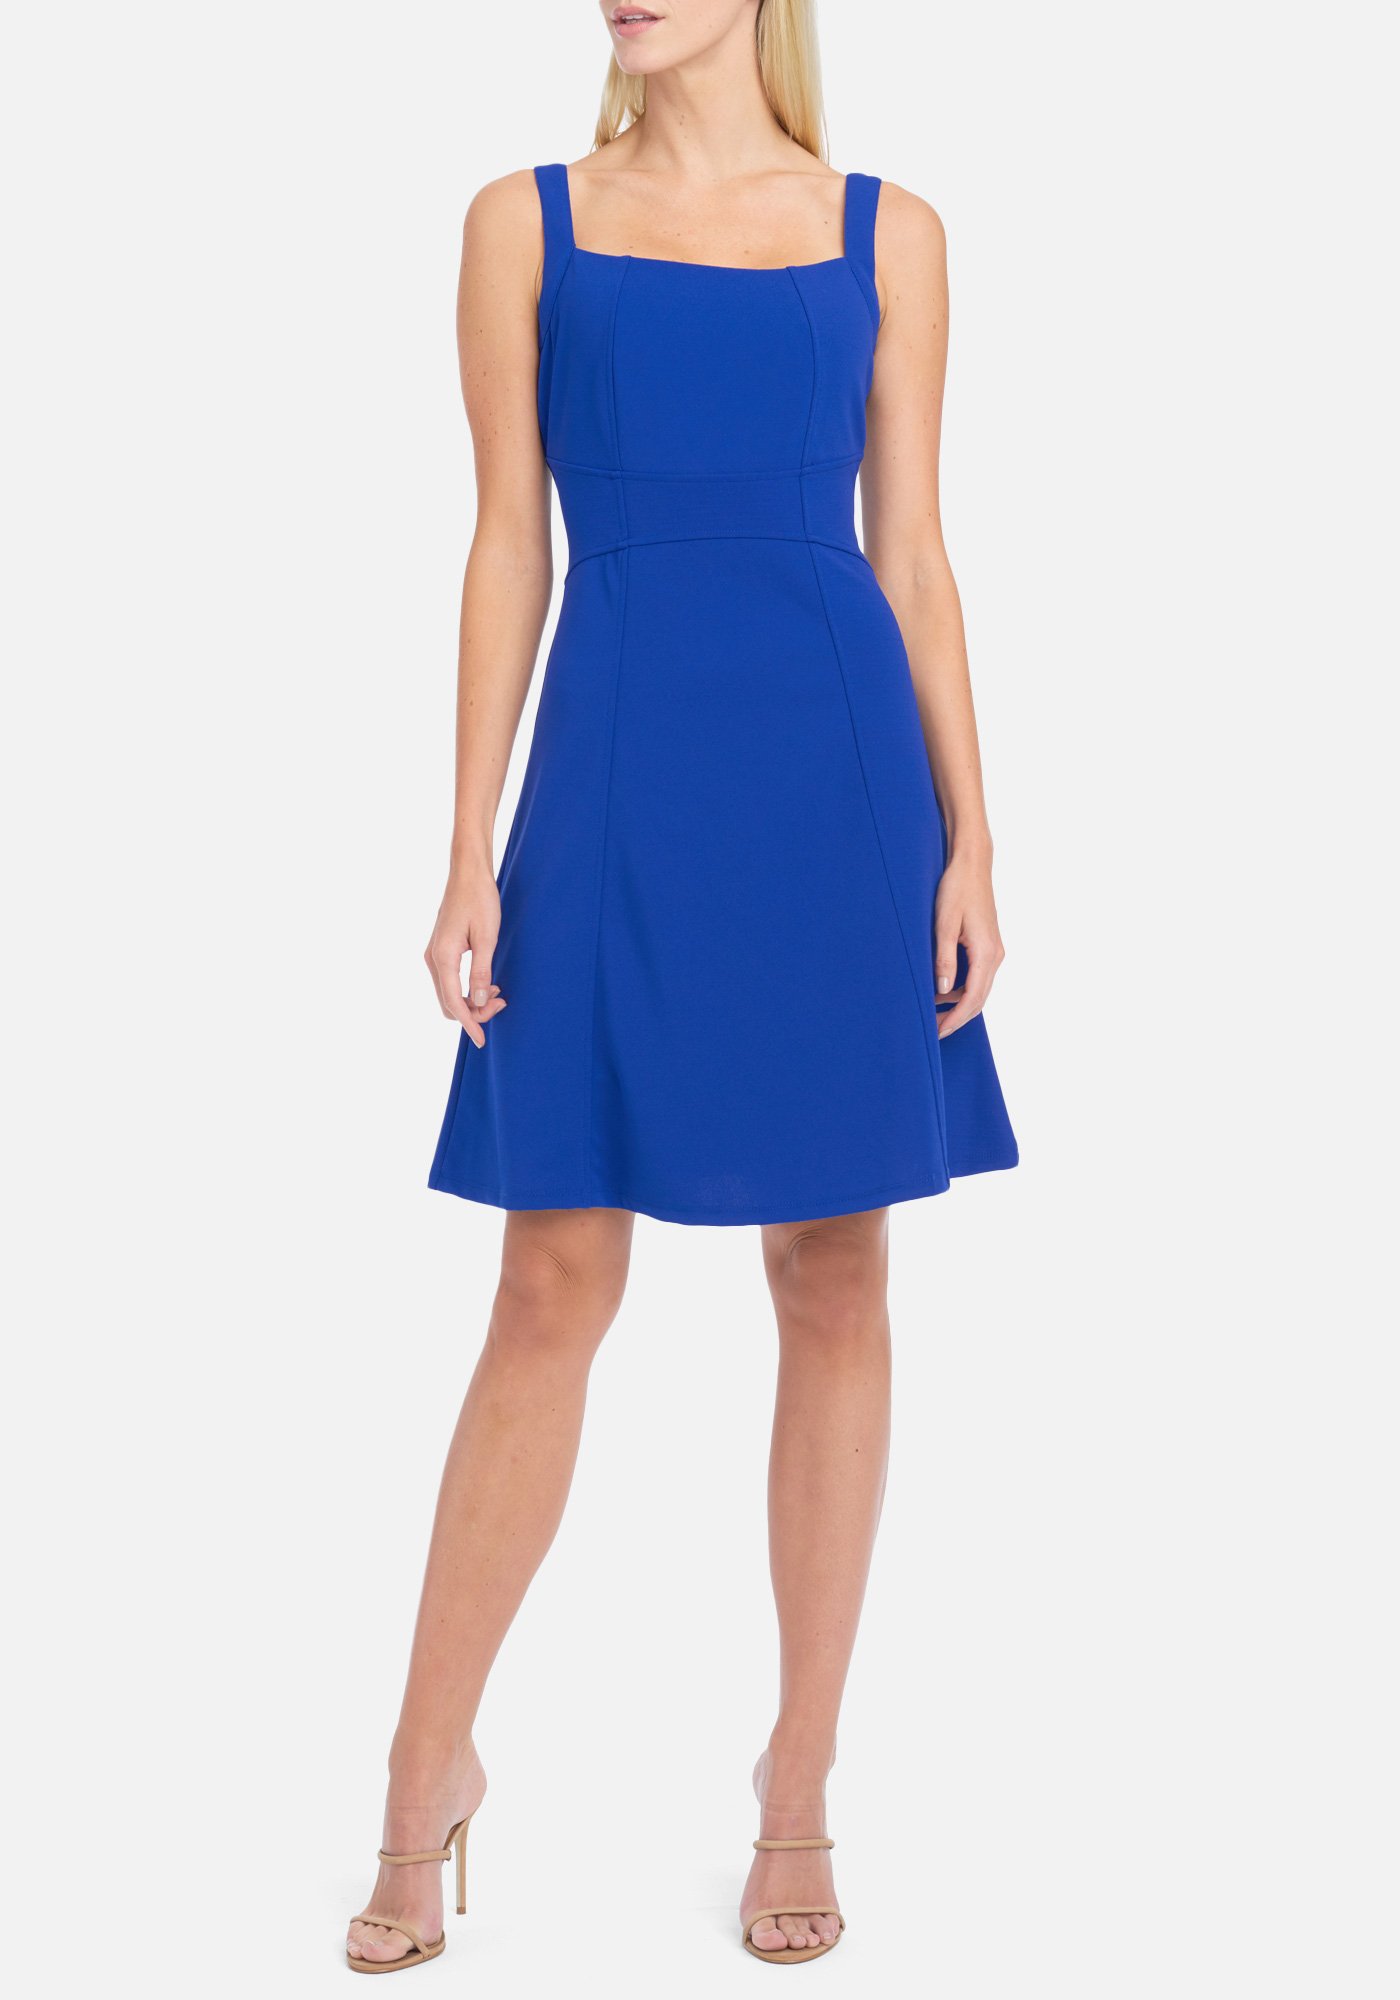 Bebe Women's Fit And Flare Dress, Size 6 in Royal Spandex